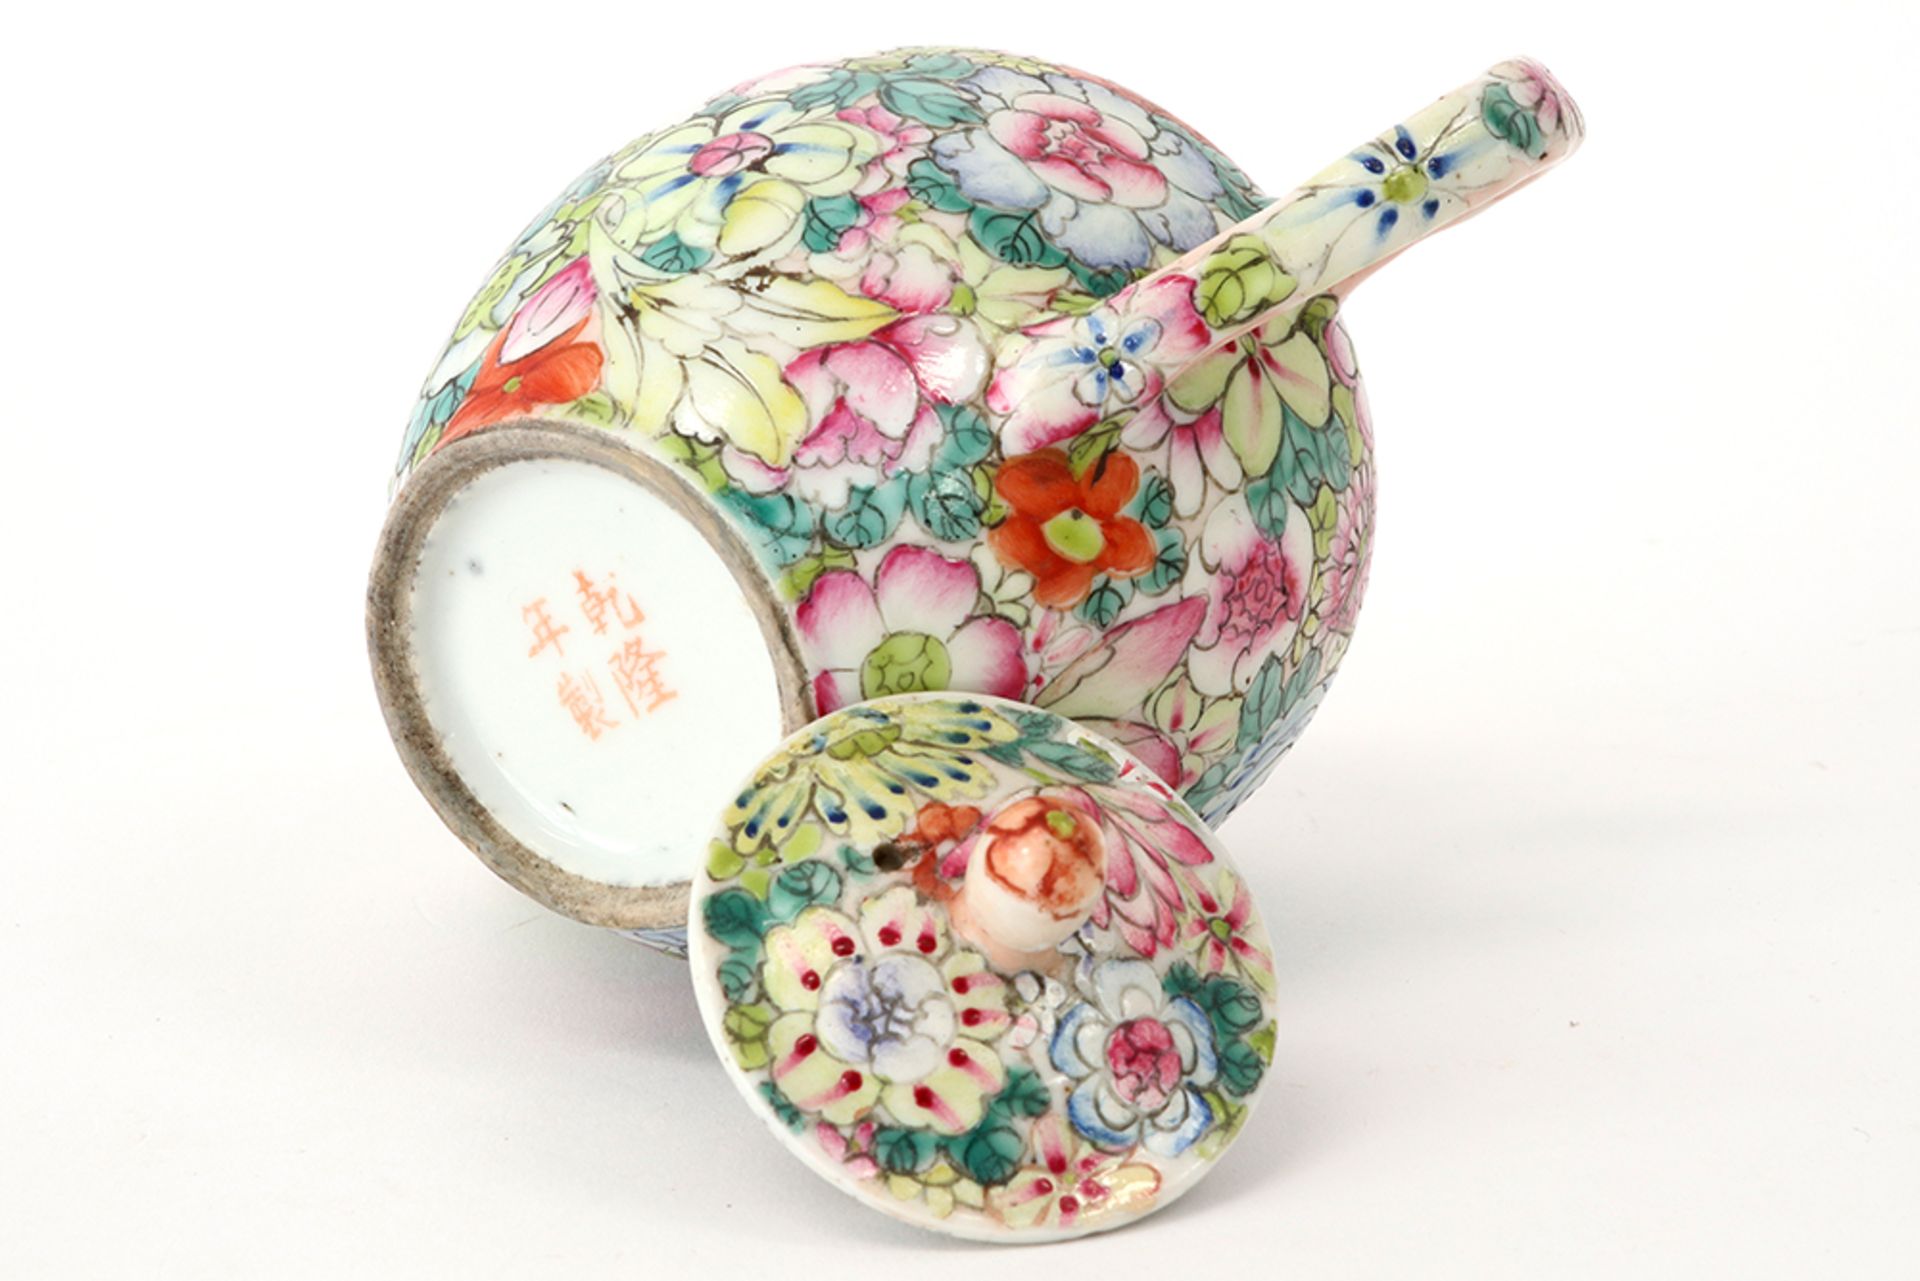 antique Chinese teapot in marked porcelain with a 'mille fiori' - decor || Antiek Chinees - Image 4 of 5